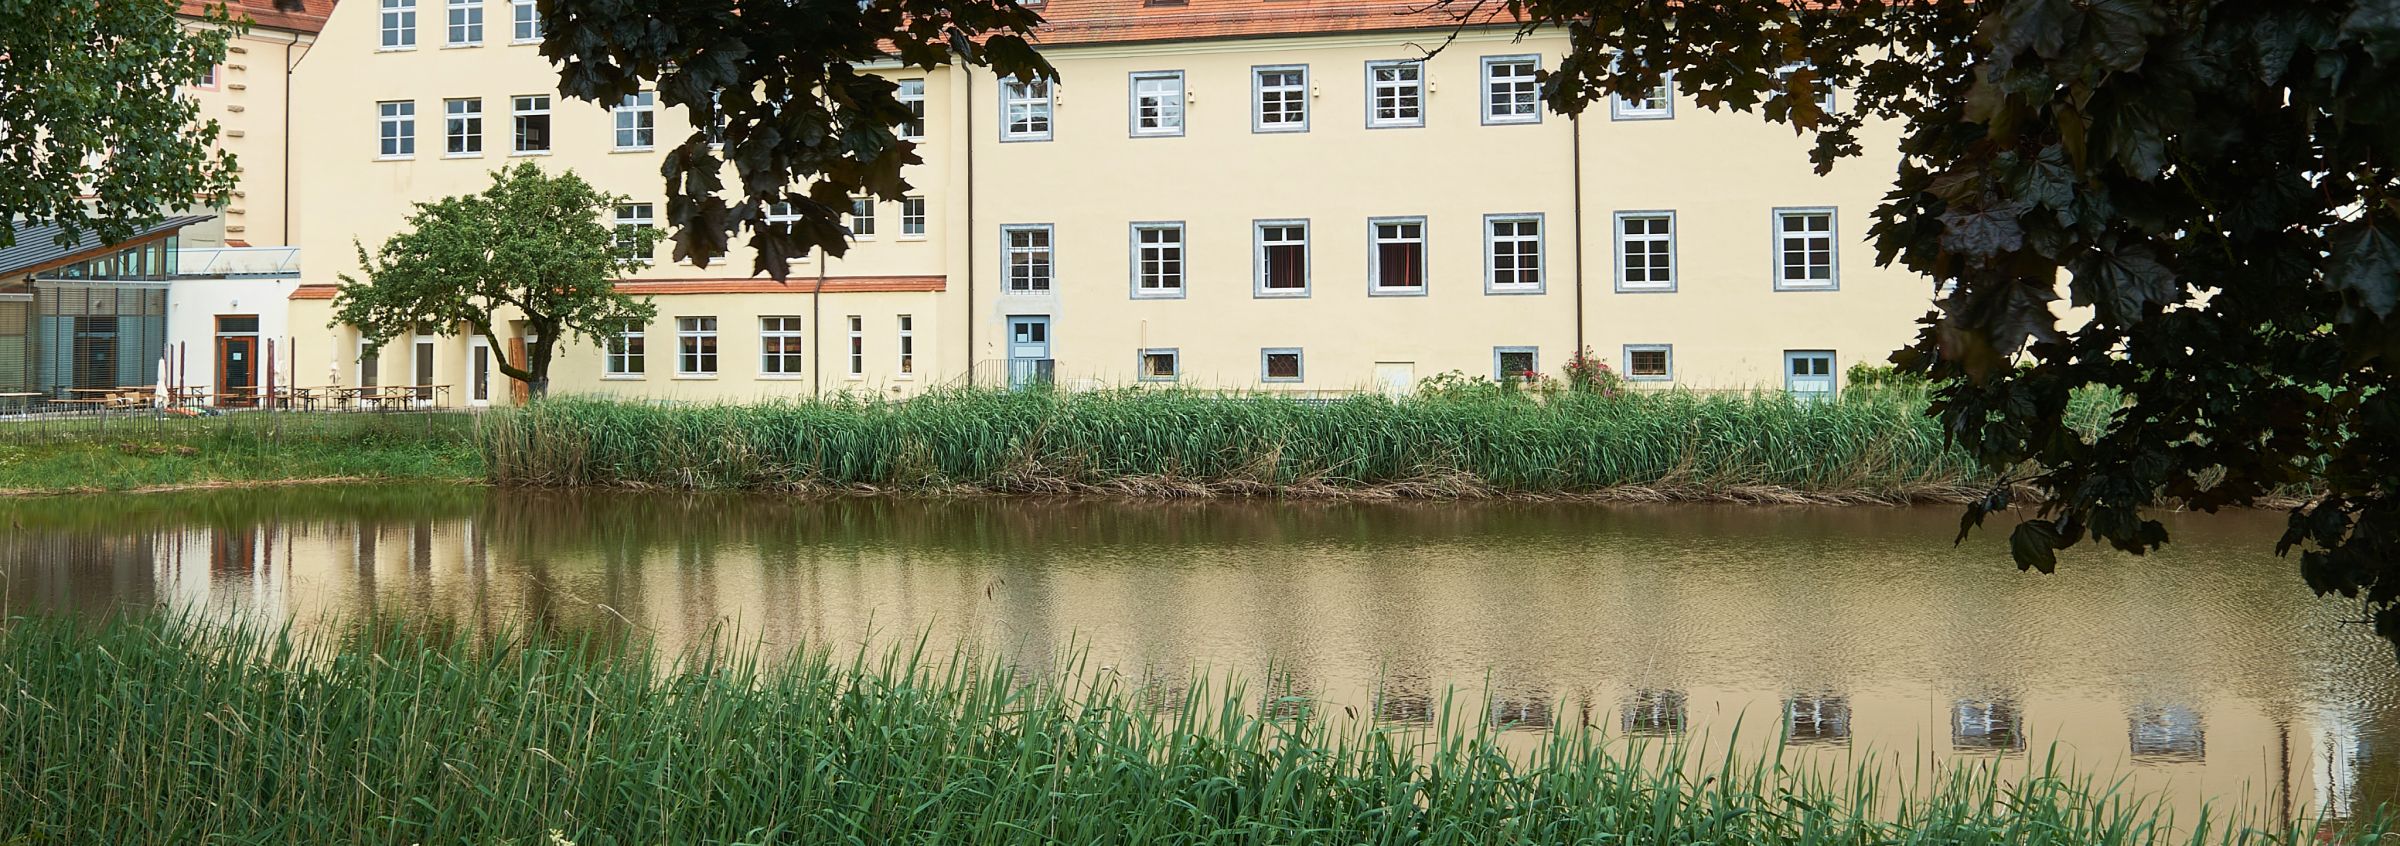 Exterior view with lake – Kloster Wald – High school – Boarding school – Workshop